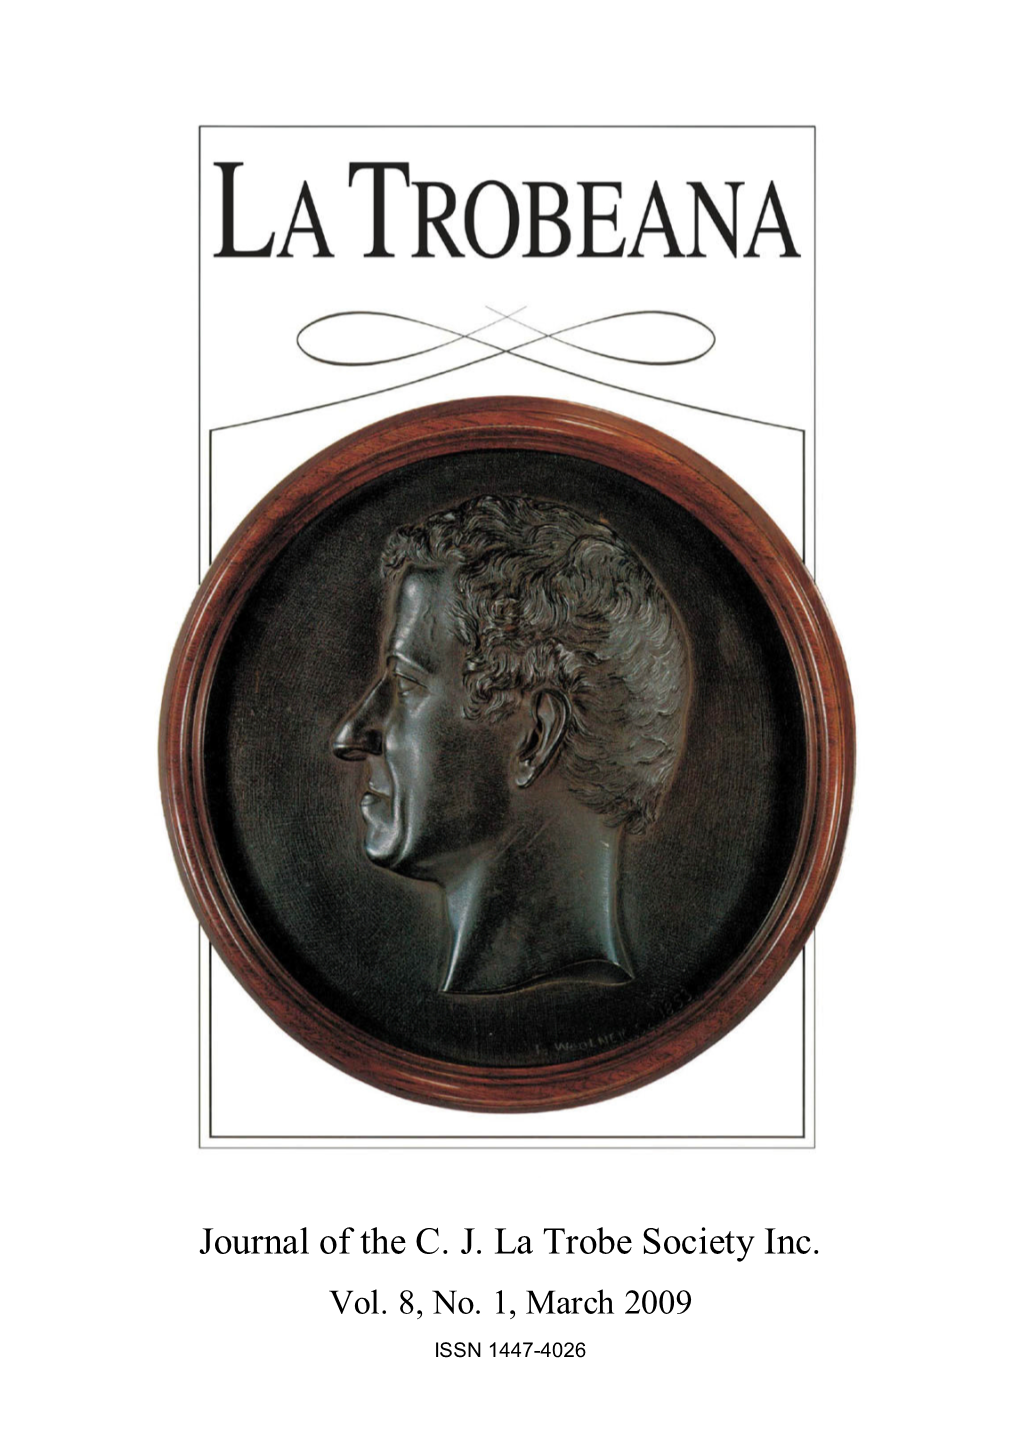 Vol. 8, No. 1, March 2009 ISSN 1447-4026 La Trobeana Is Kindly Sponsored by Mr Peter Lovell